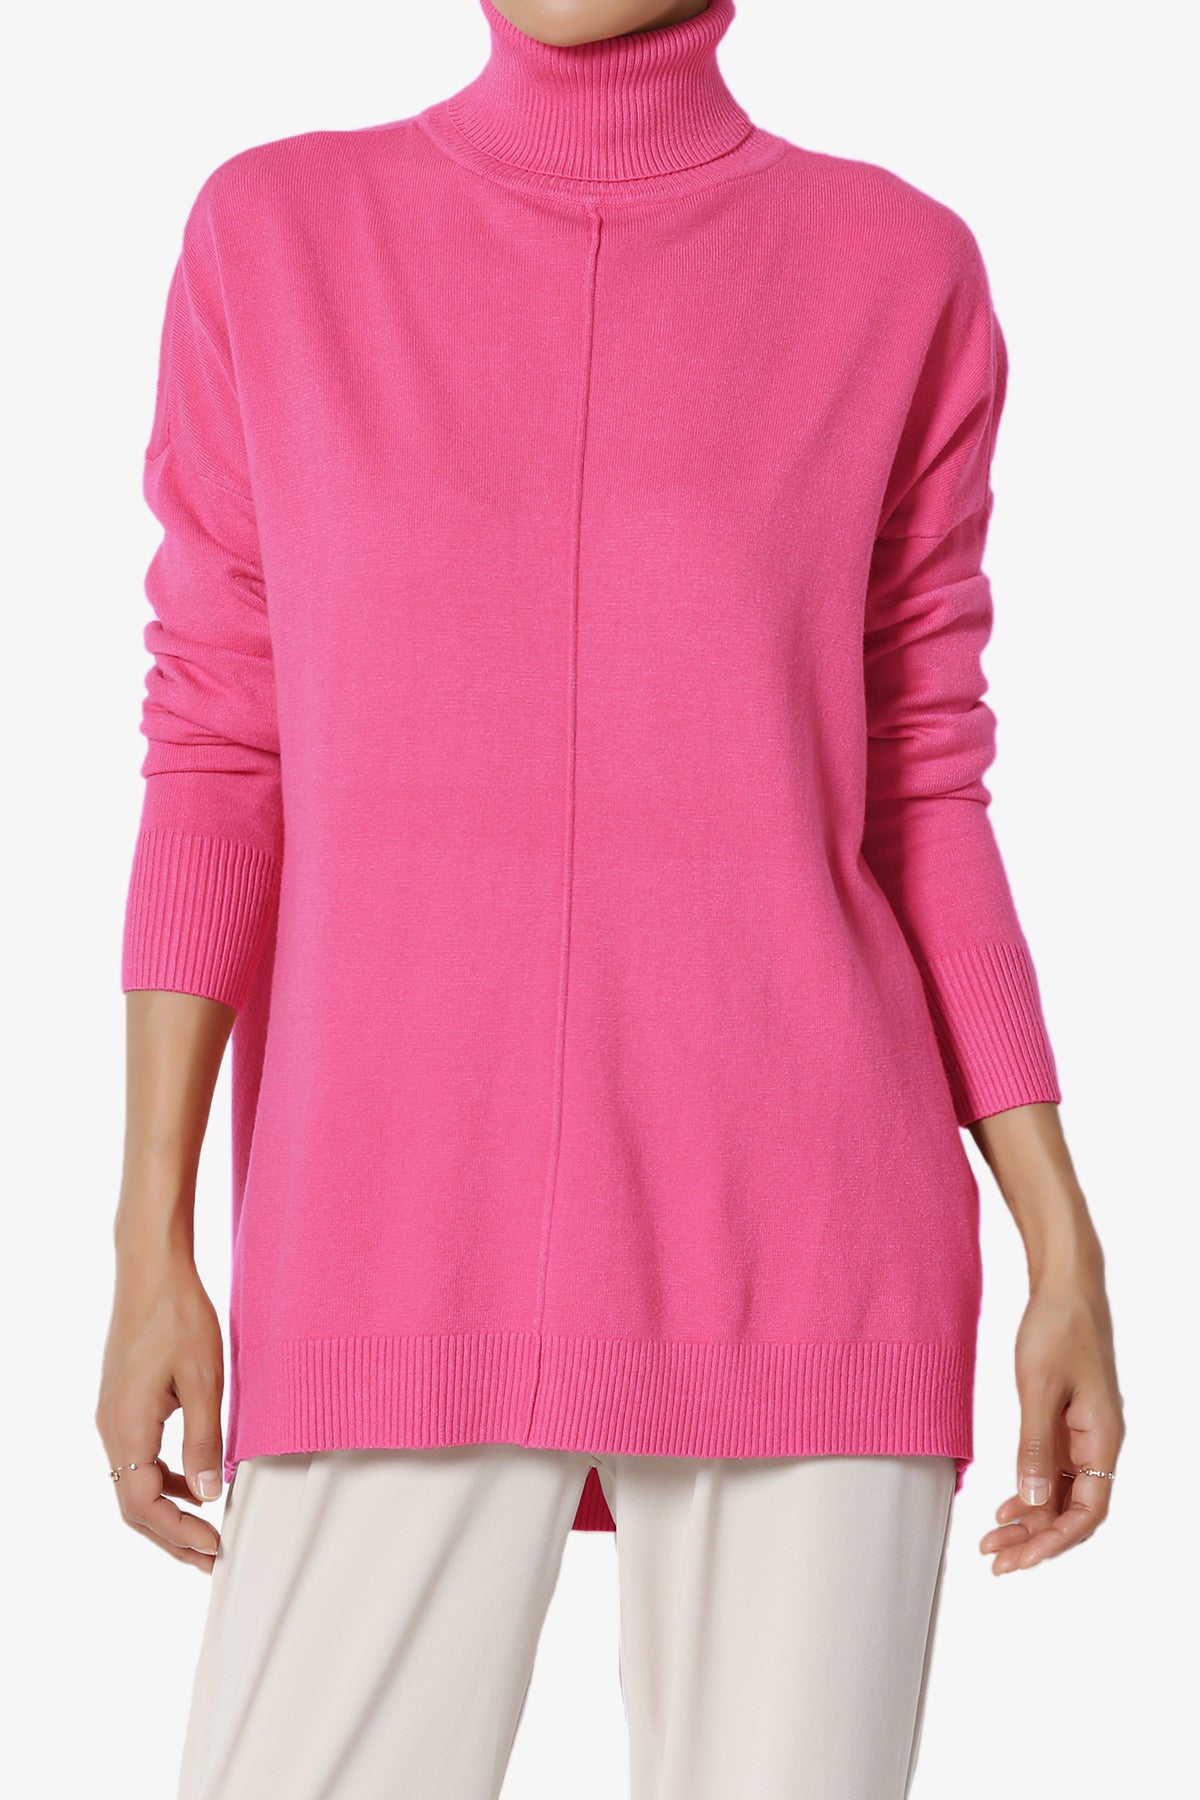 Henley Turtle Neck Knit Sweater HOT PINK_1